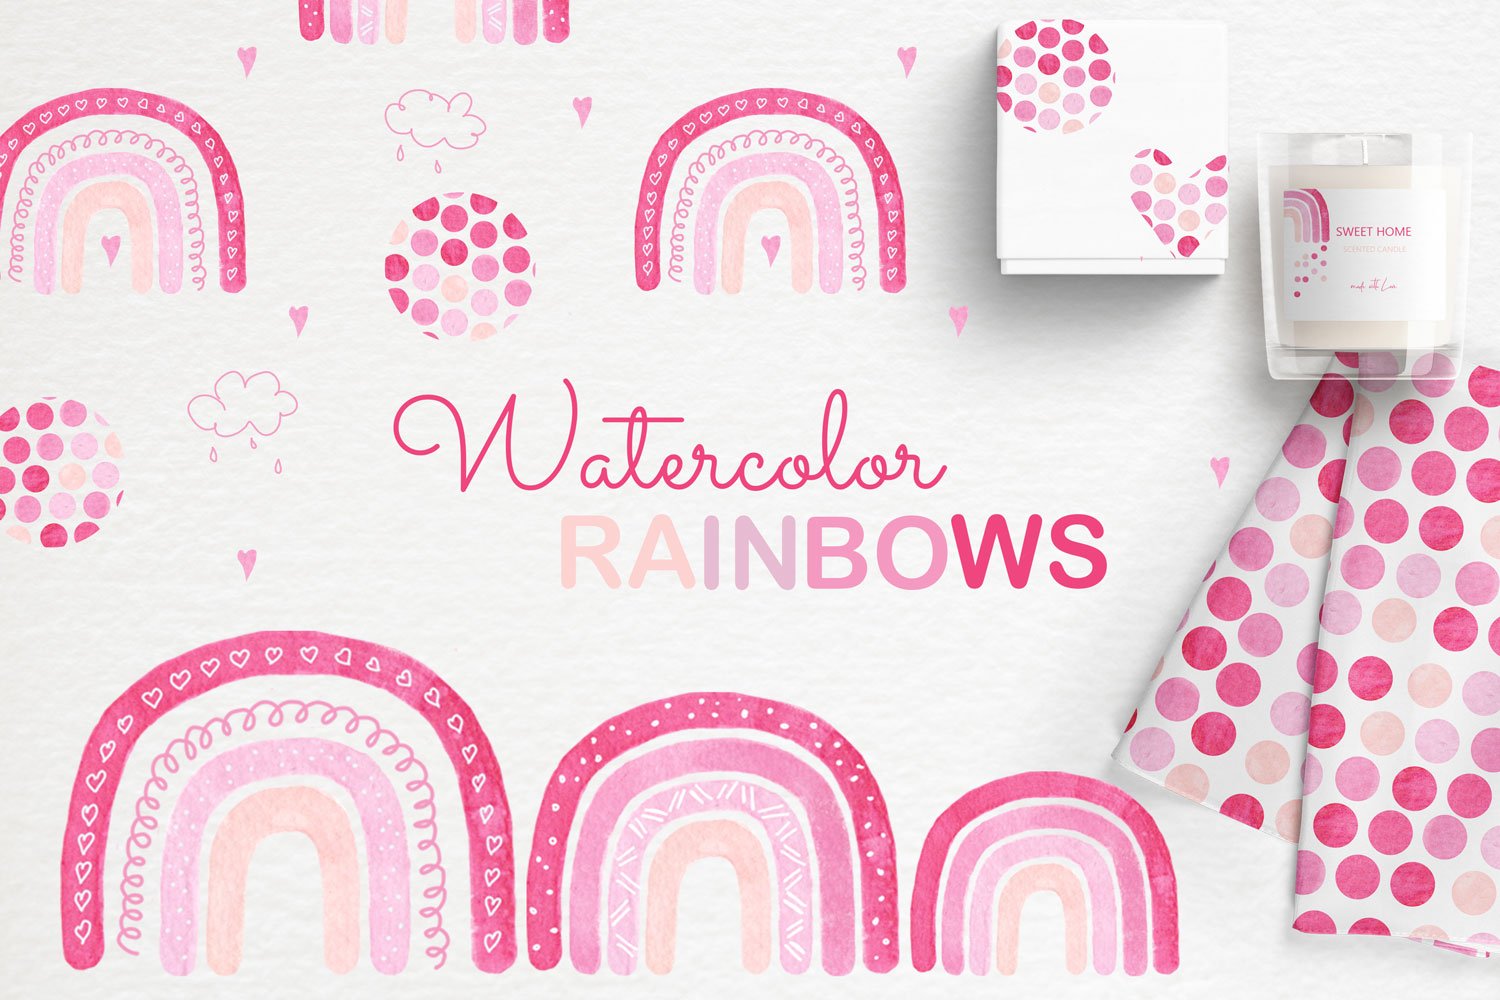 Watercolor rainbow clipart patterns cover image.